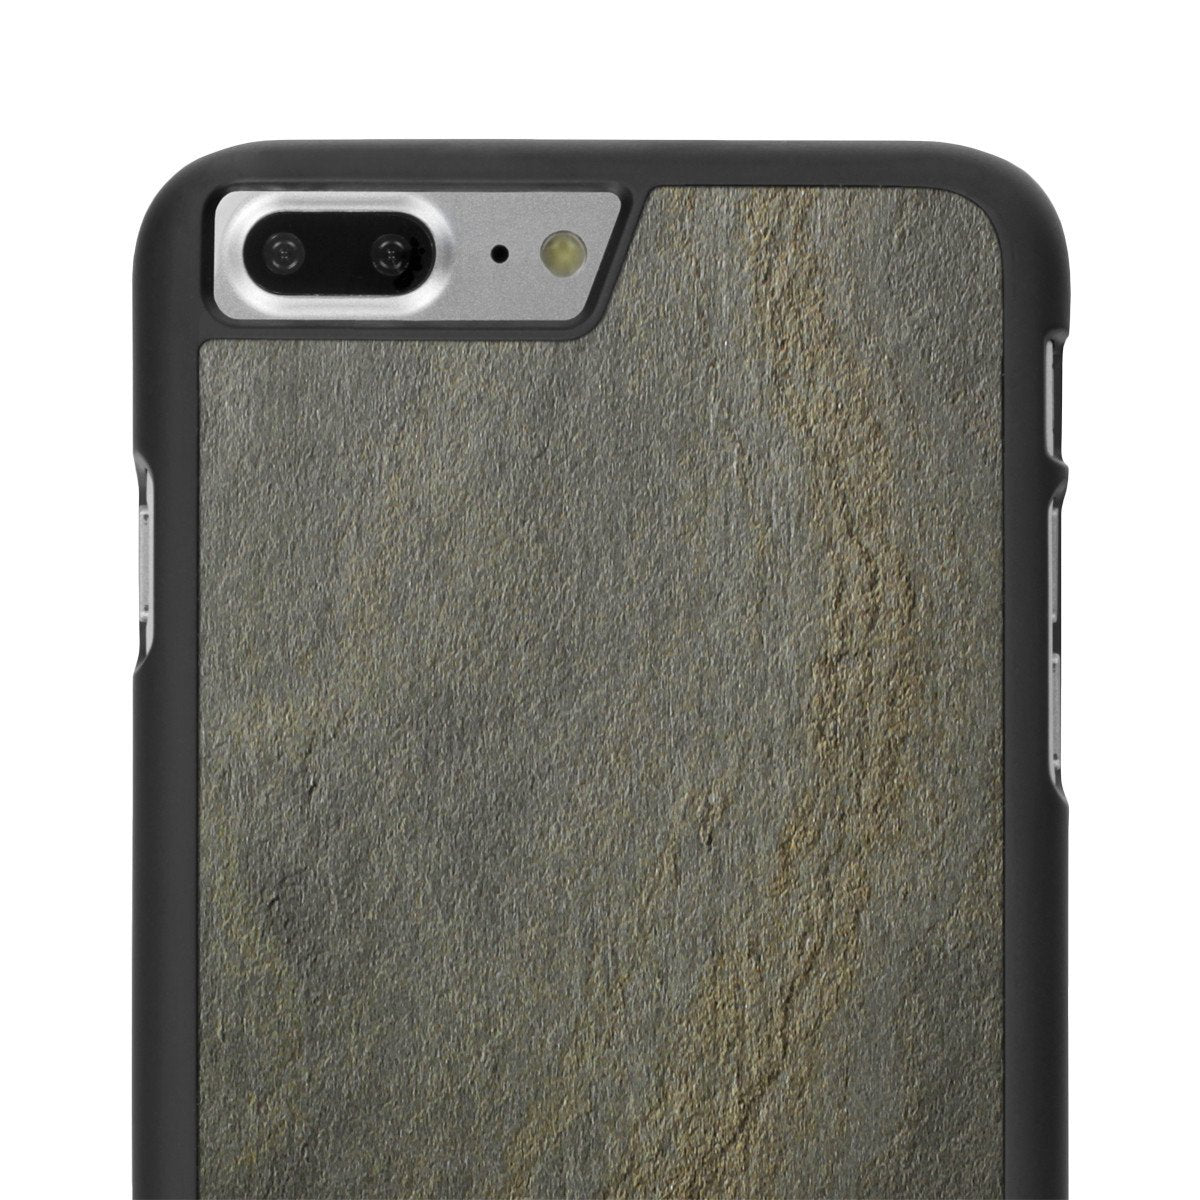  iPhone 7 Plus —  Stone Snap Case - Cover-Up - 6